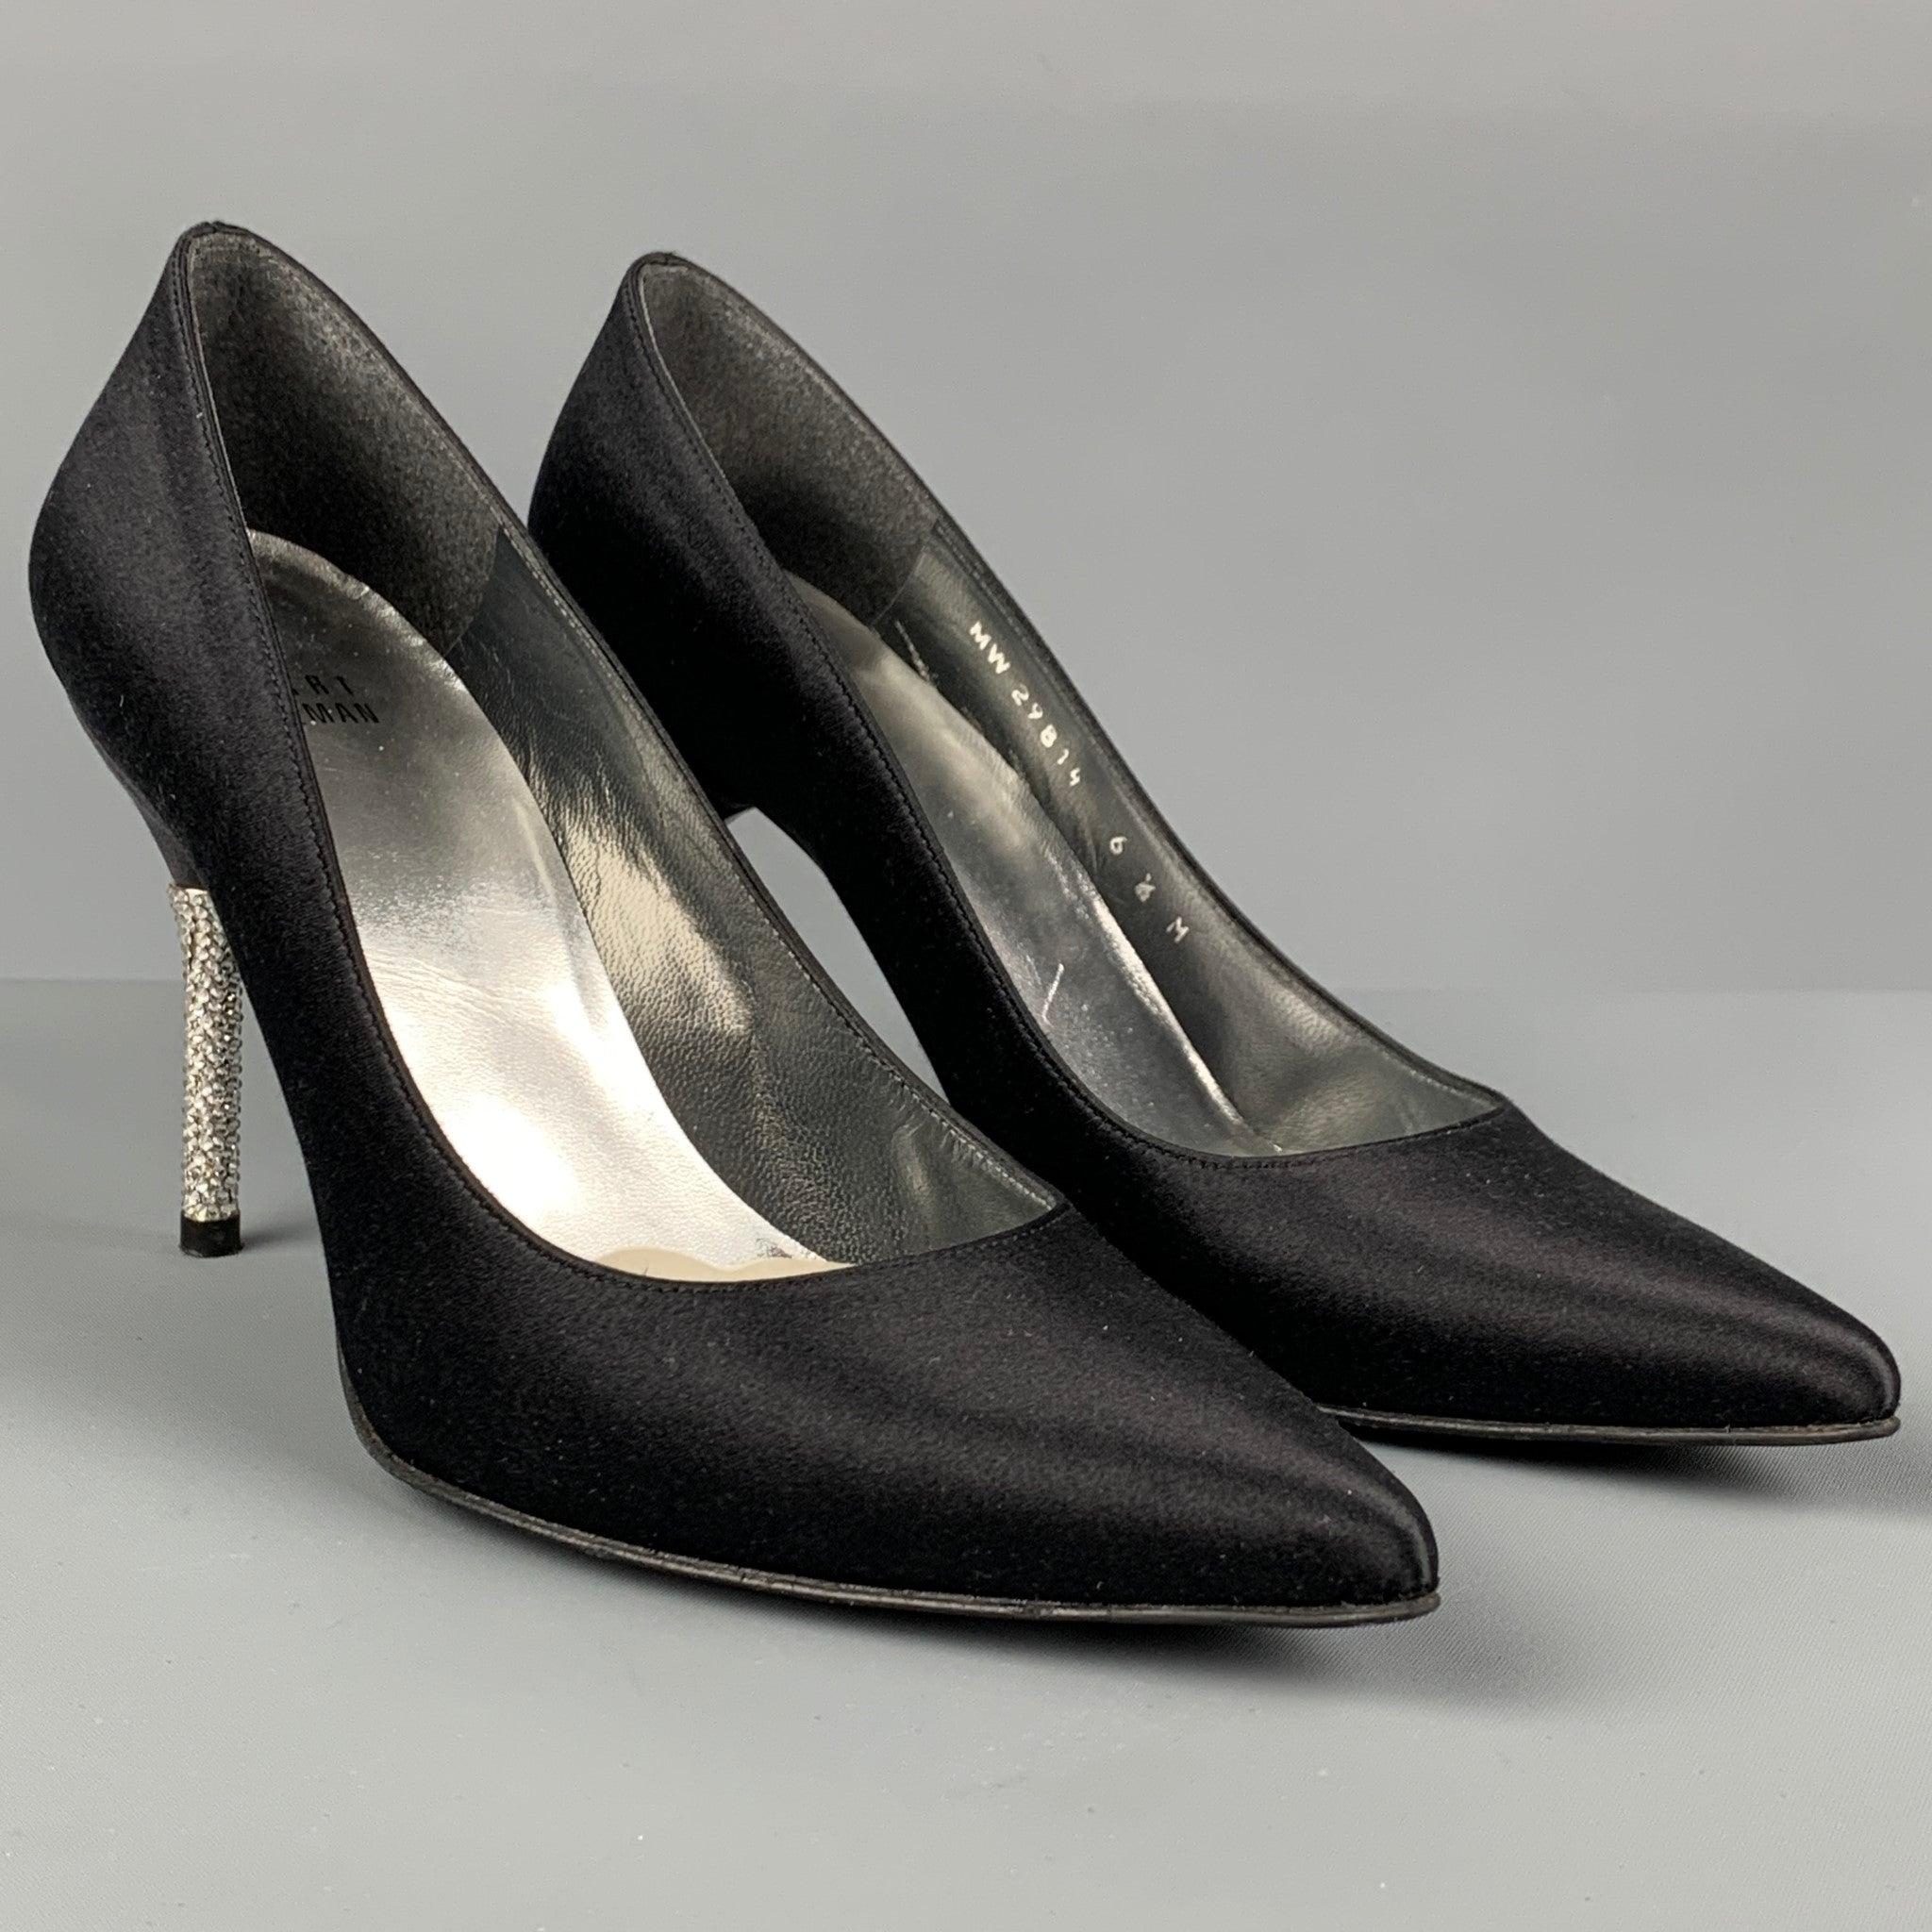 STUART WEITZMAN pumps comes in a black & silver silk featuring a rhinestone heel and a pointed toe. Made in Spainches 
Very Good
Pre-Owned Condition. 

Marked:   MW 29814 6.5M 

Measurements: 
  Heel: 3 inches 
  
  
 
Reference: 116940
Category: